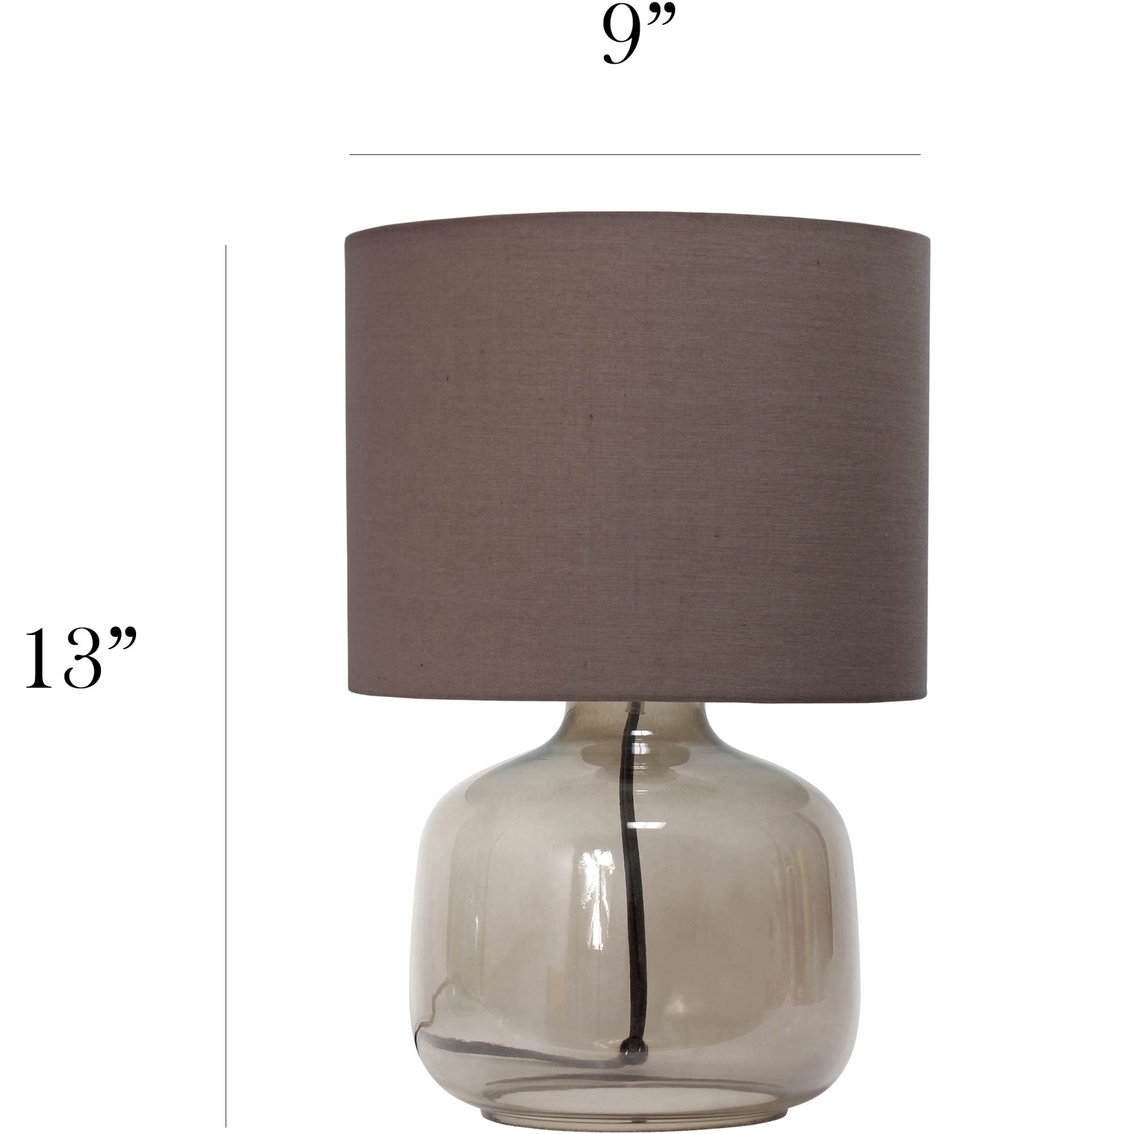 Simple Designs 13 in. Glass Table Lamp - Image 8 of 8